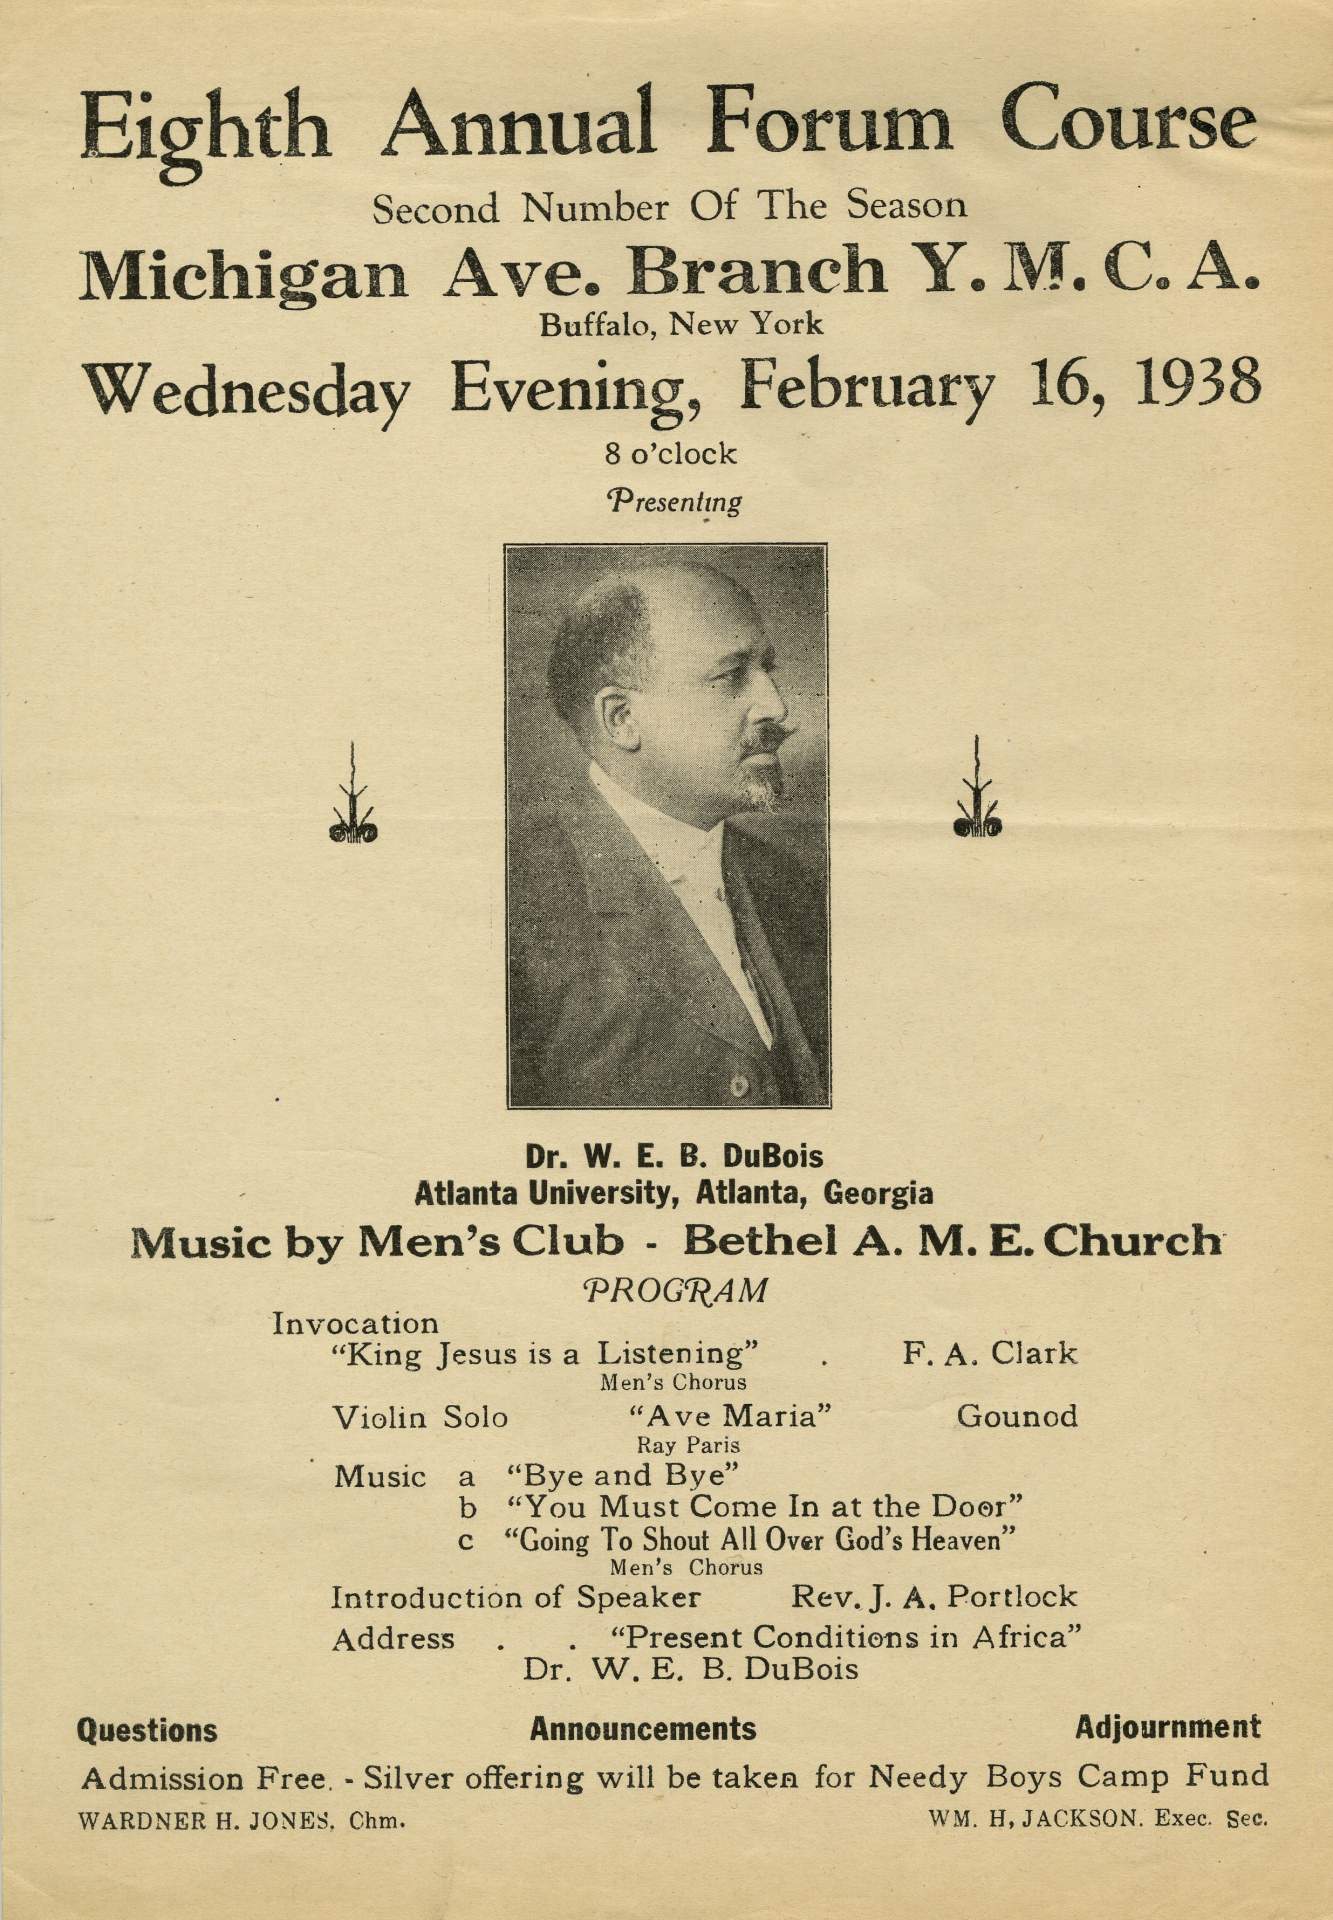 Eighth Annual Forum Course (Dr. W. E. B. DuBois pictured)